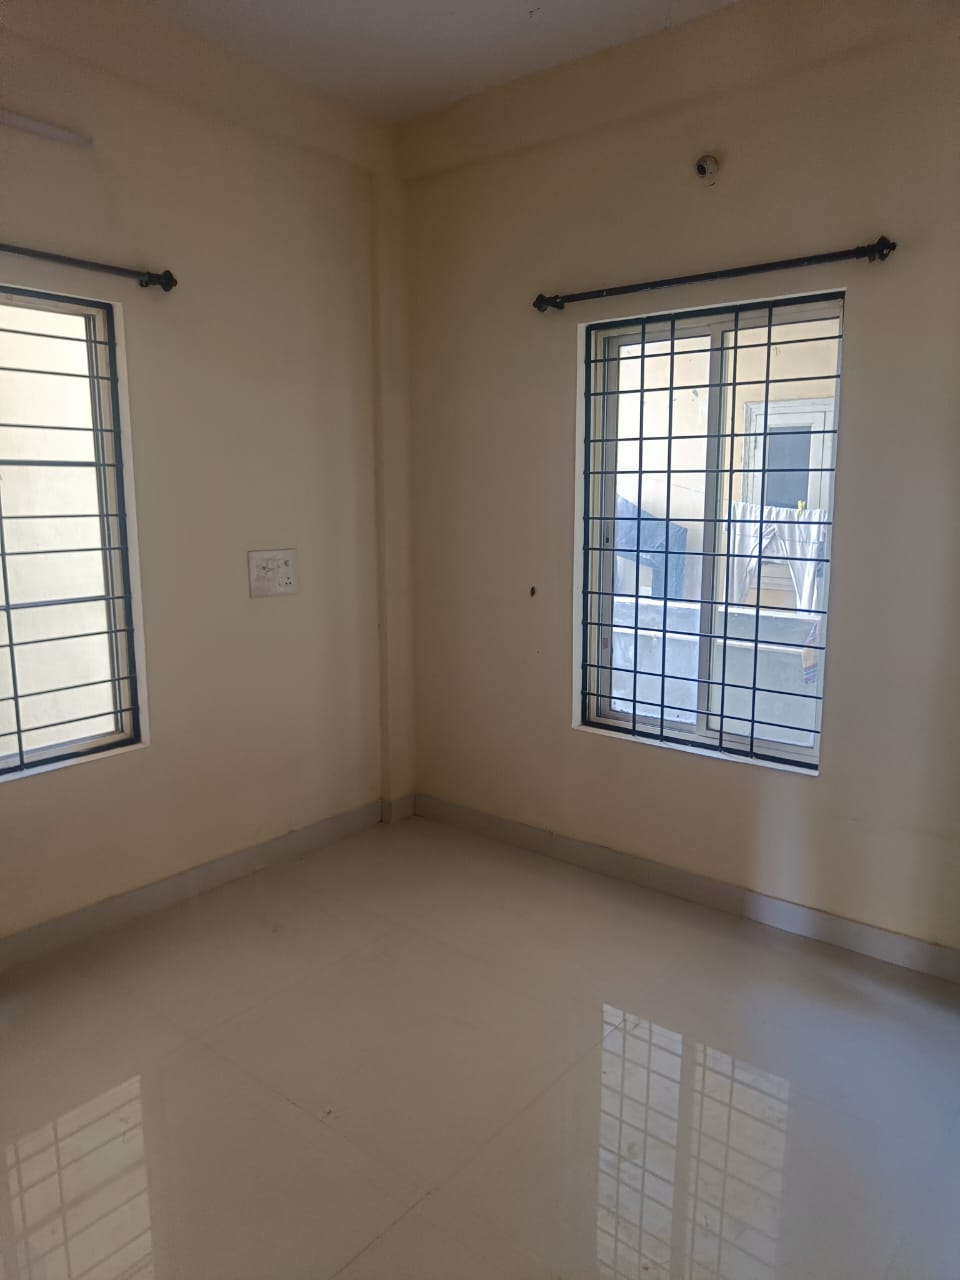 3 BHK Independent House for Lease Only at JAML2 - 4473 in M.S. Ramaiah Nagar